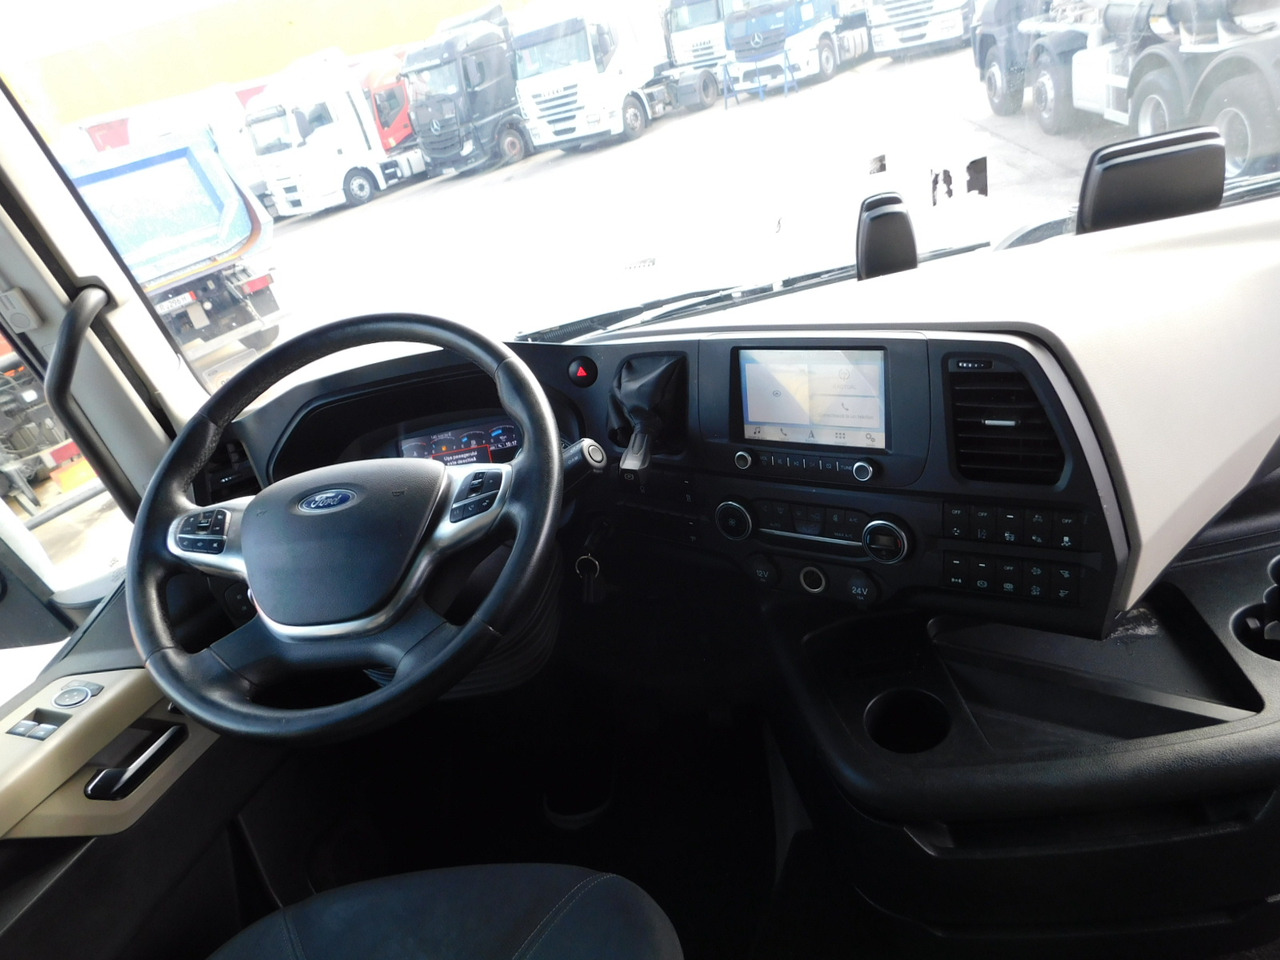 Tracteur routier Ford F max: photos 6